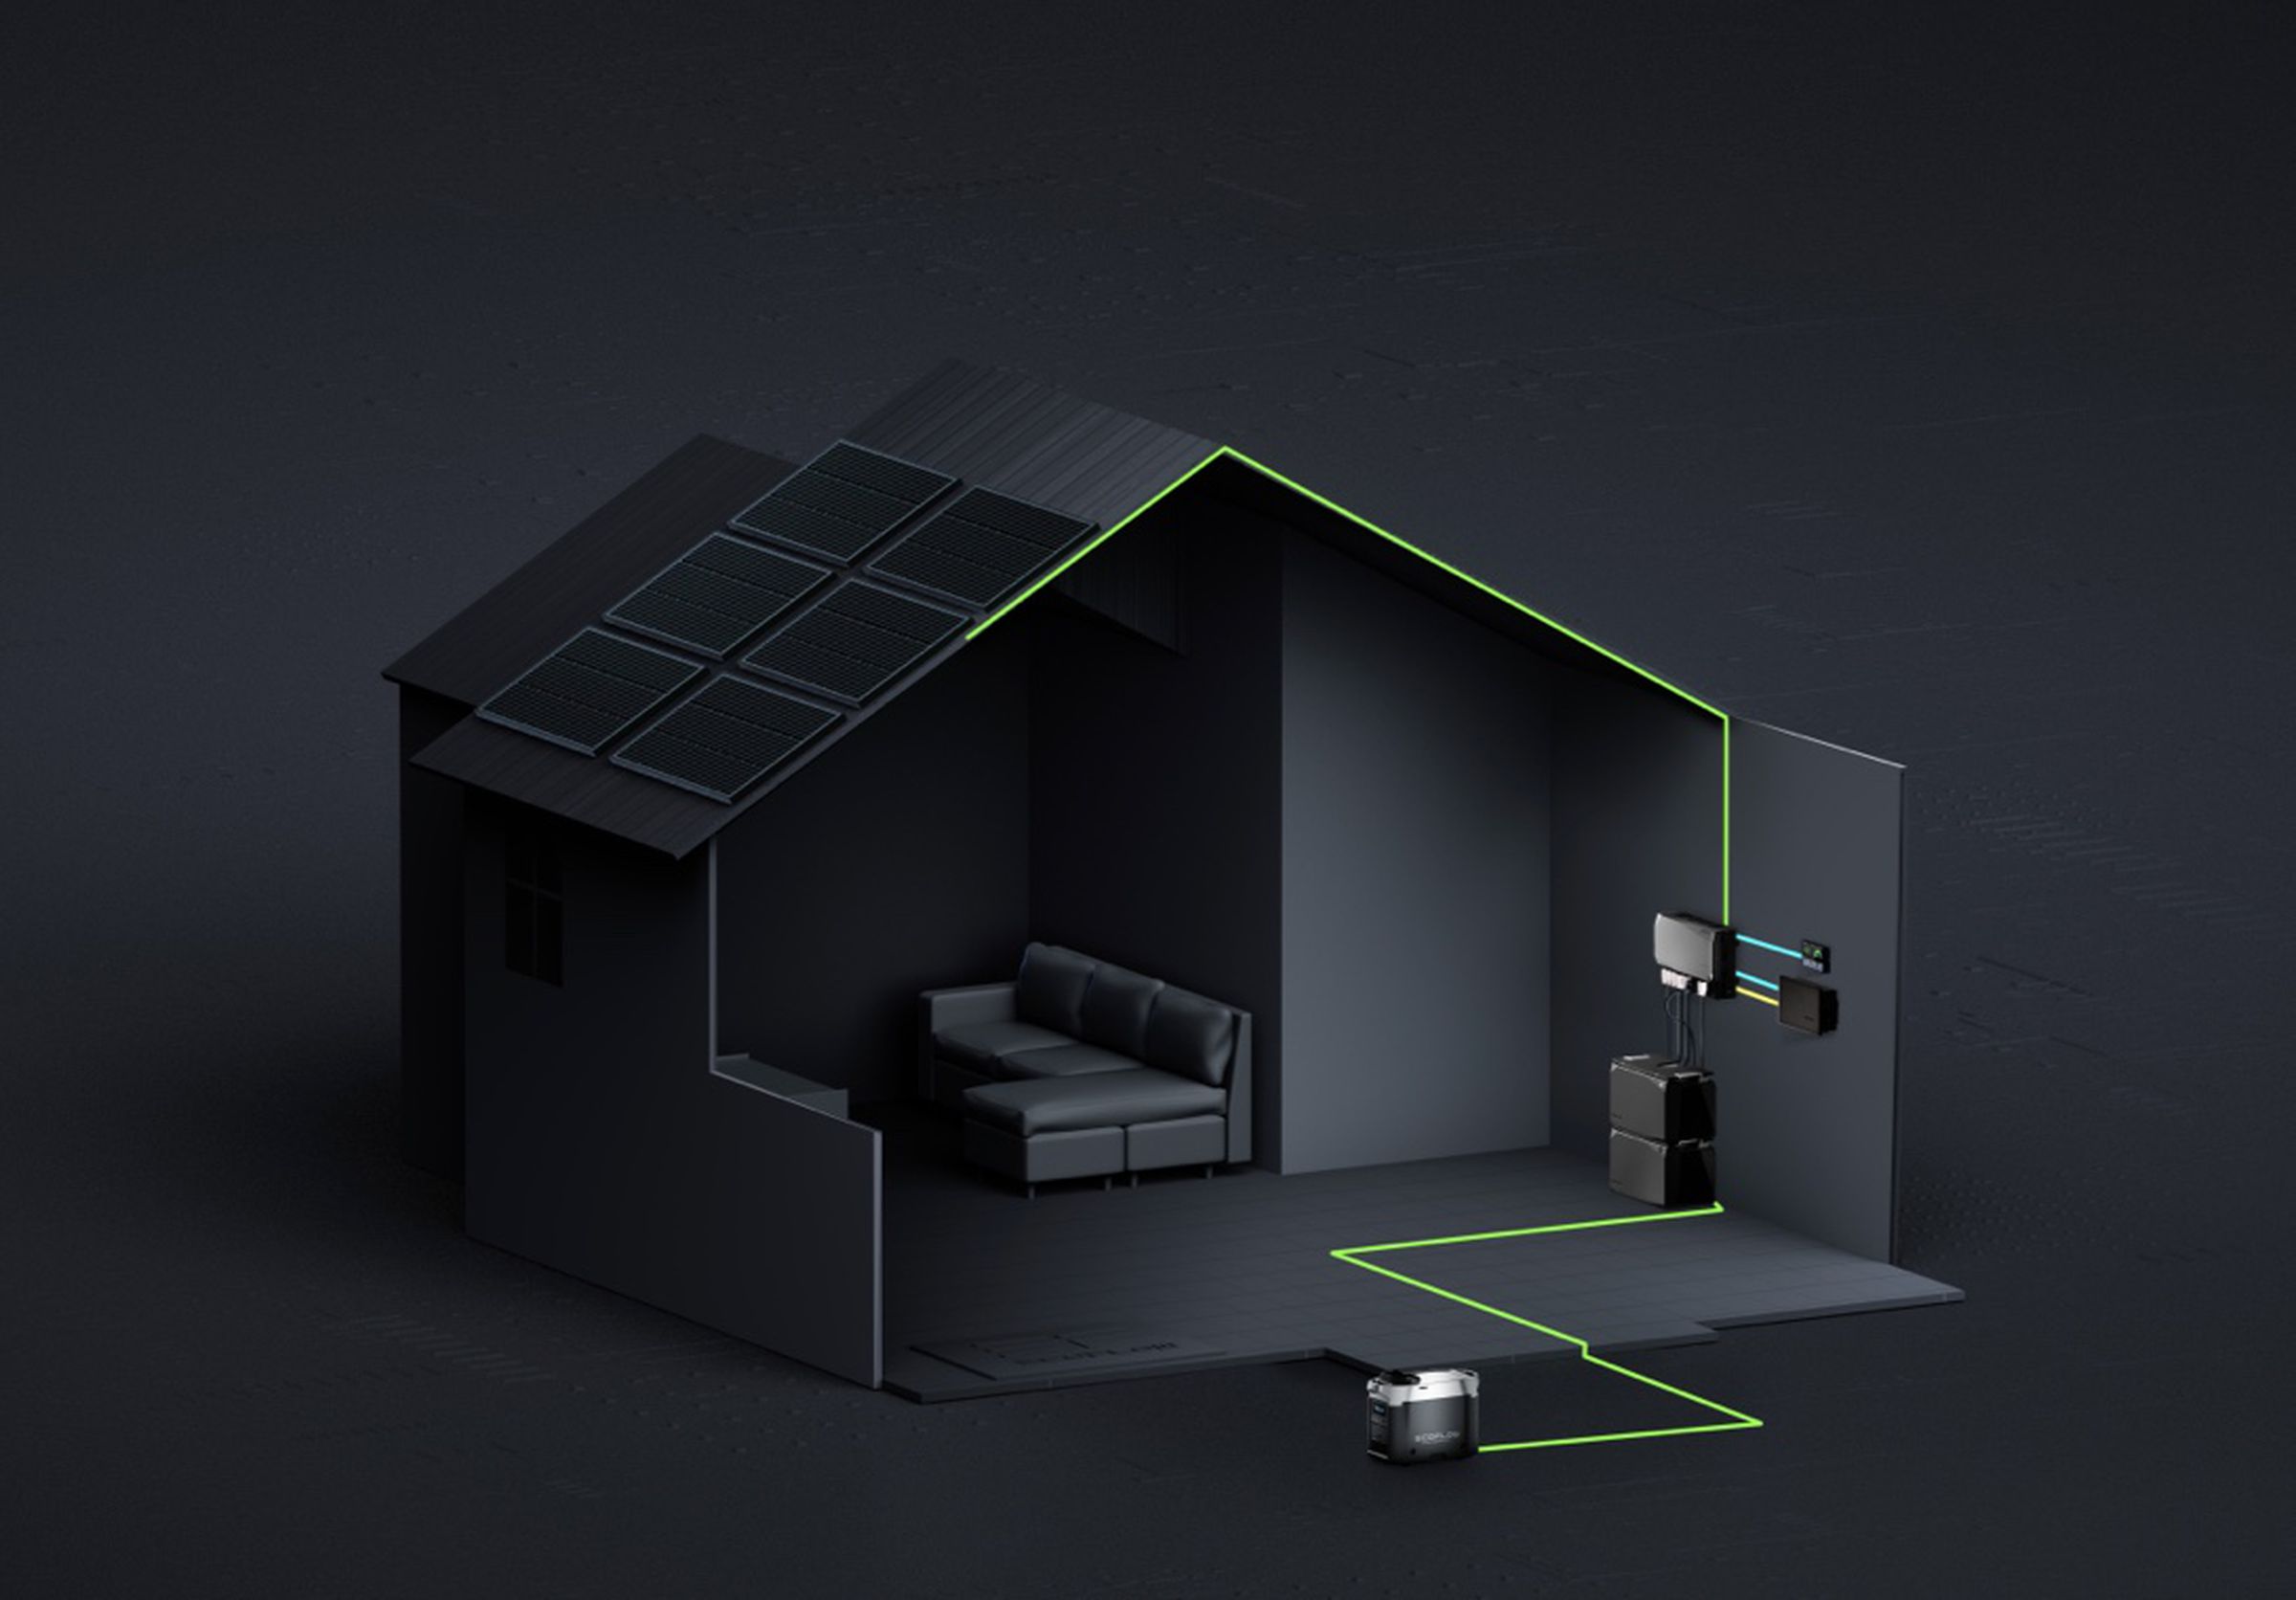 How the kit fits inside a workshop or remote cabin, powered by an optional EcoFlow Smart Generator and solar panels installed on the roof.